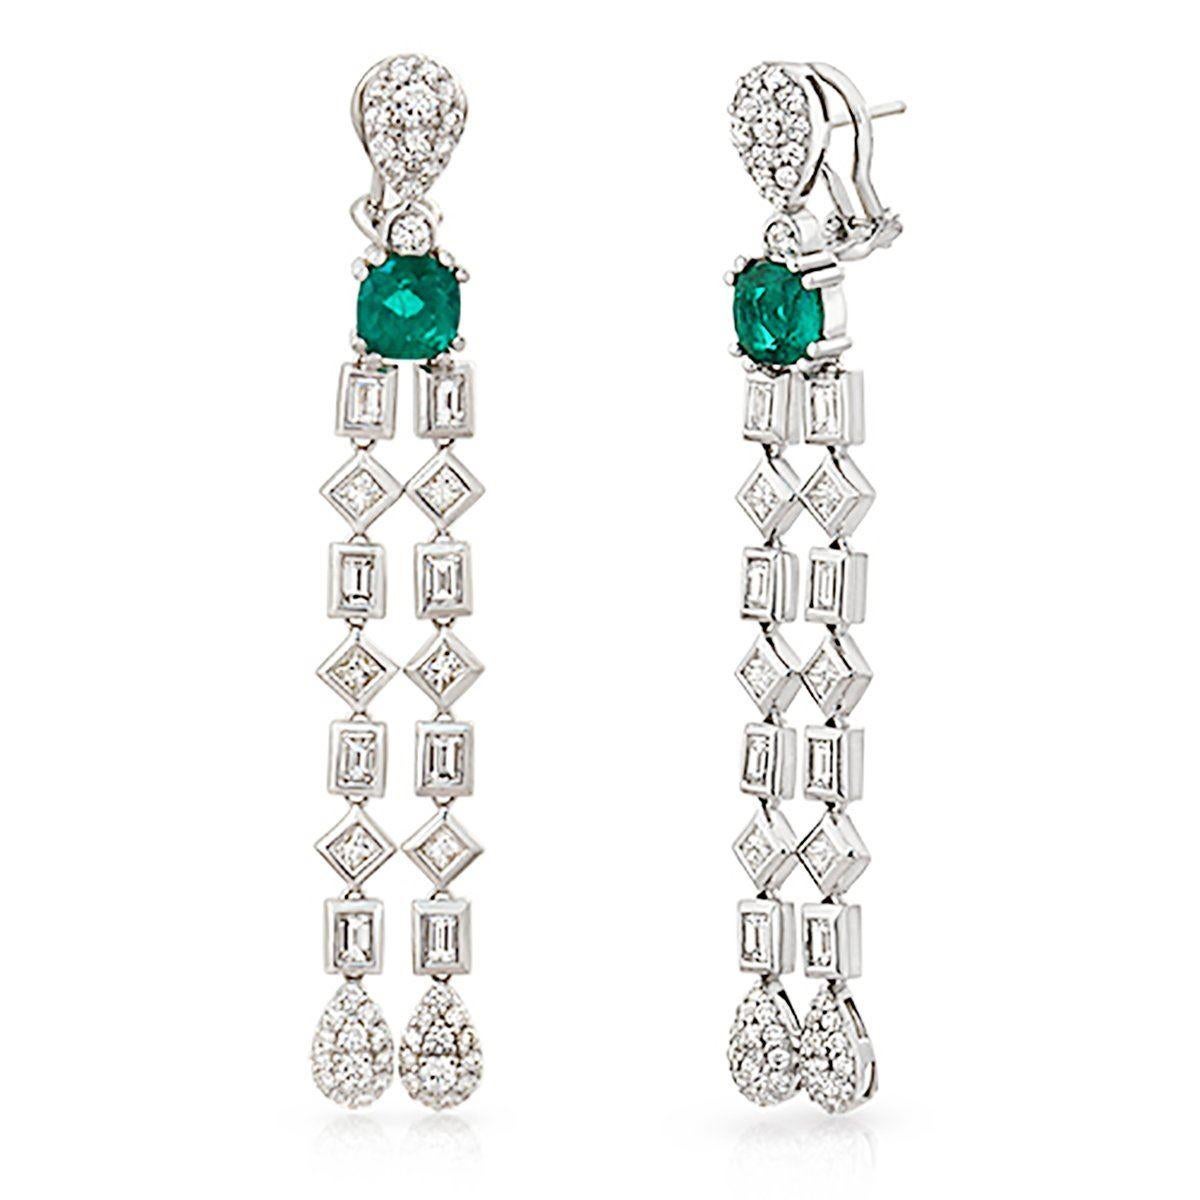 Height: 60 mm
Width: 7.5 mm
Metal:18K White Gold
Hallmarks: 18K
Total Weight: 15.3 Grams
Stone Type: 1.57 CT Natural Emerald & G SI1 3.95 CT Diamonds
Condition: New
Estimated Price: $14252
Stock Number: E797